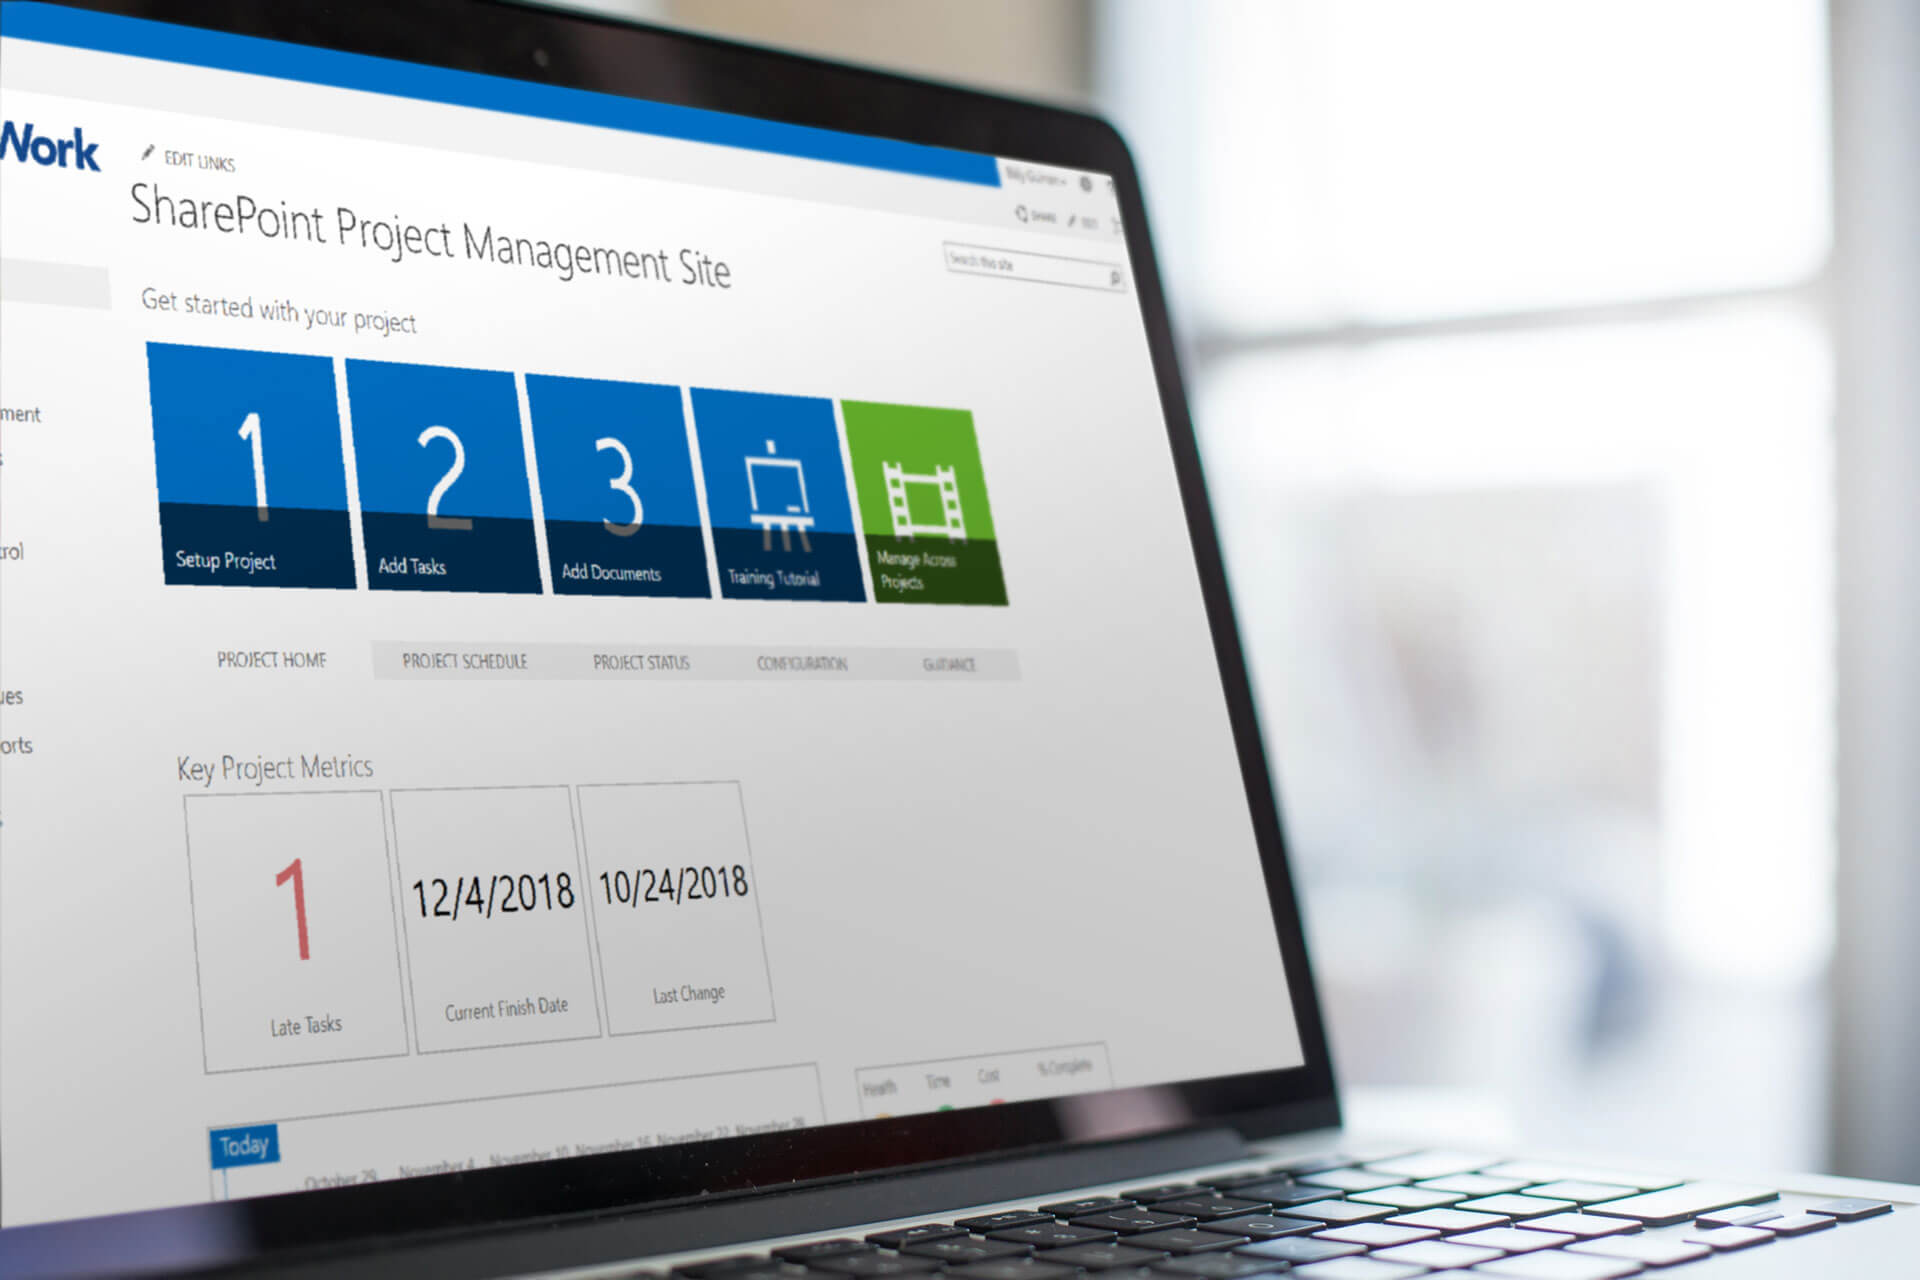 6 Capabilities That Make SharePoint the Best Tool for Project Management